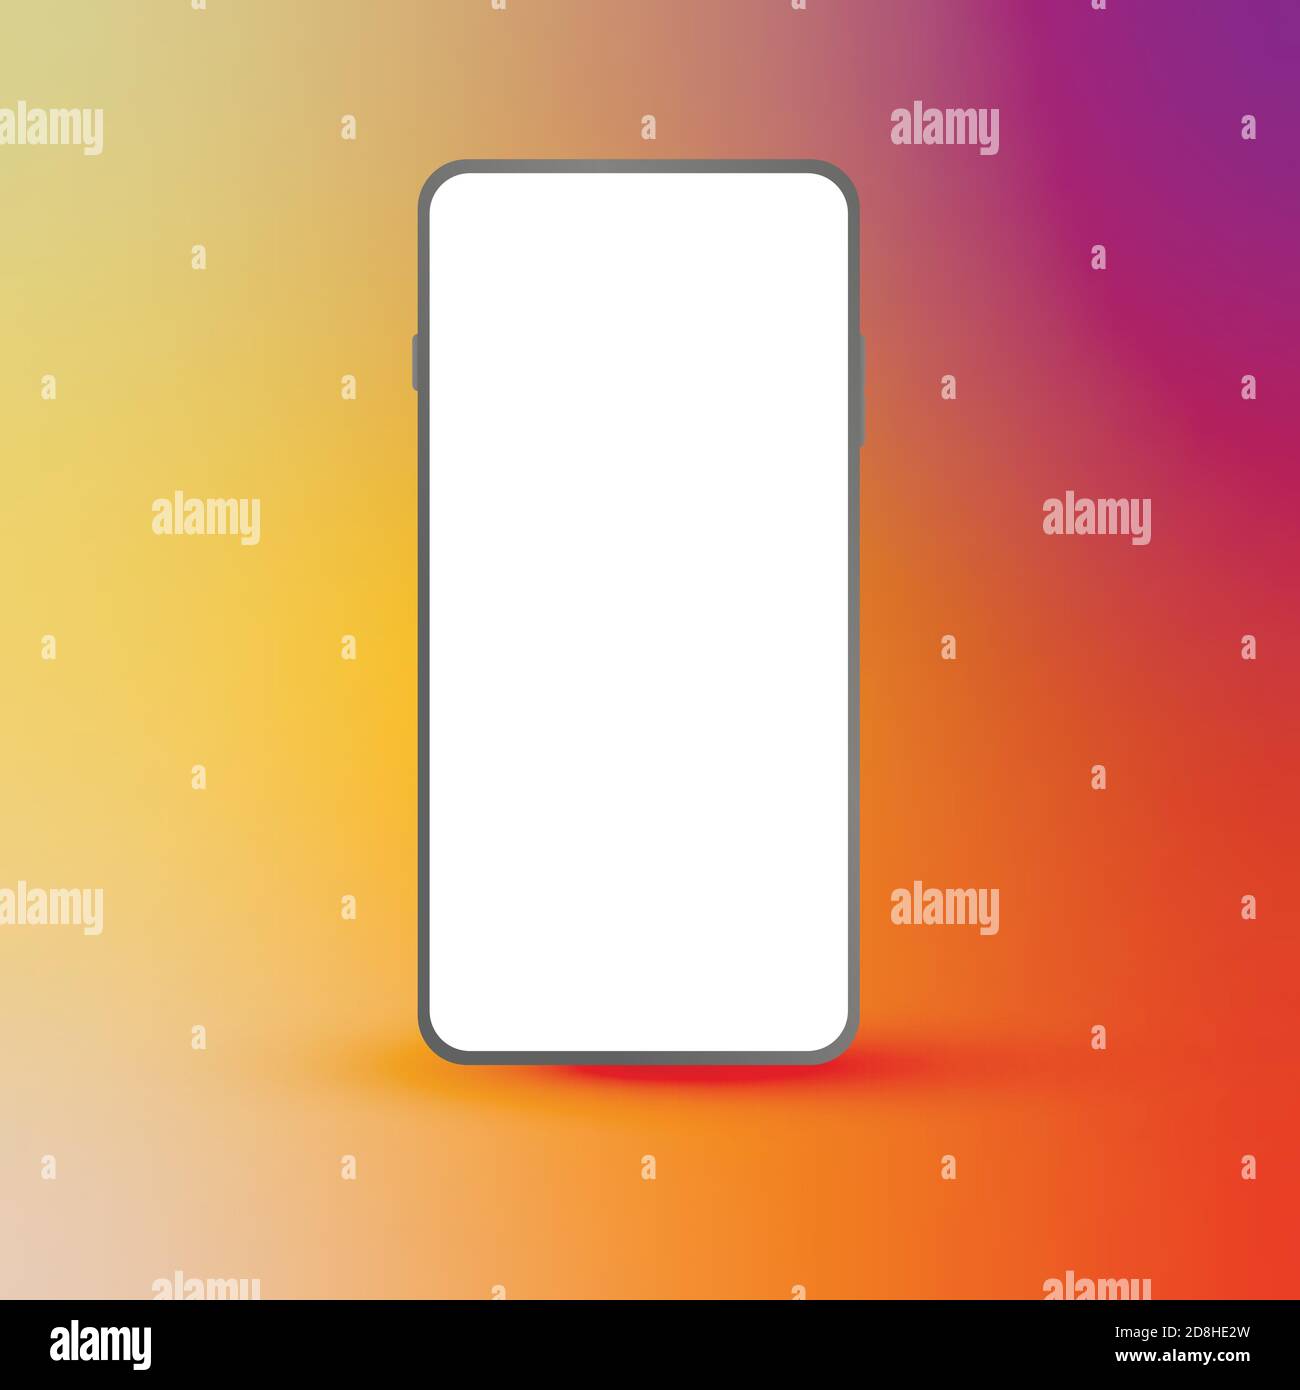 Mobile phone with blank screen. Silver smartphone 3D perspective view. Colorful gradient mesh background. Template for graphic design presentation Stock Vector